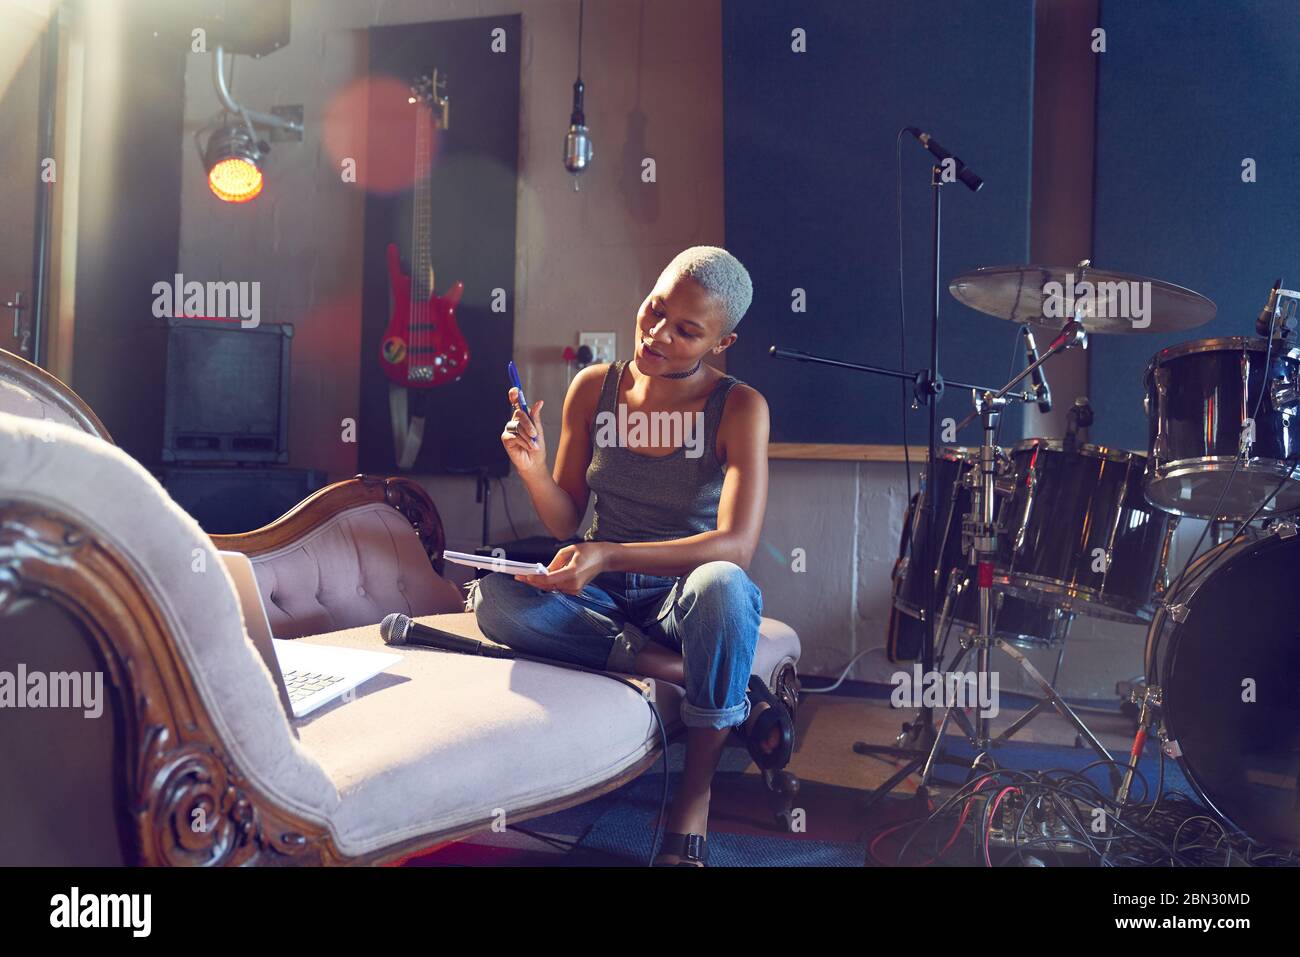 Young female musician song writing in recording studio Stock Photo